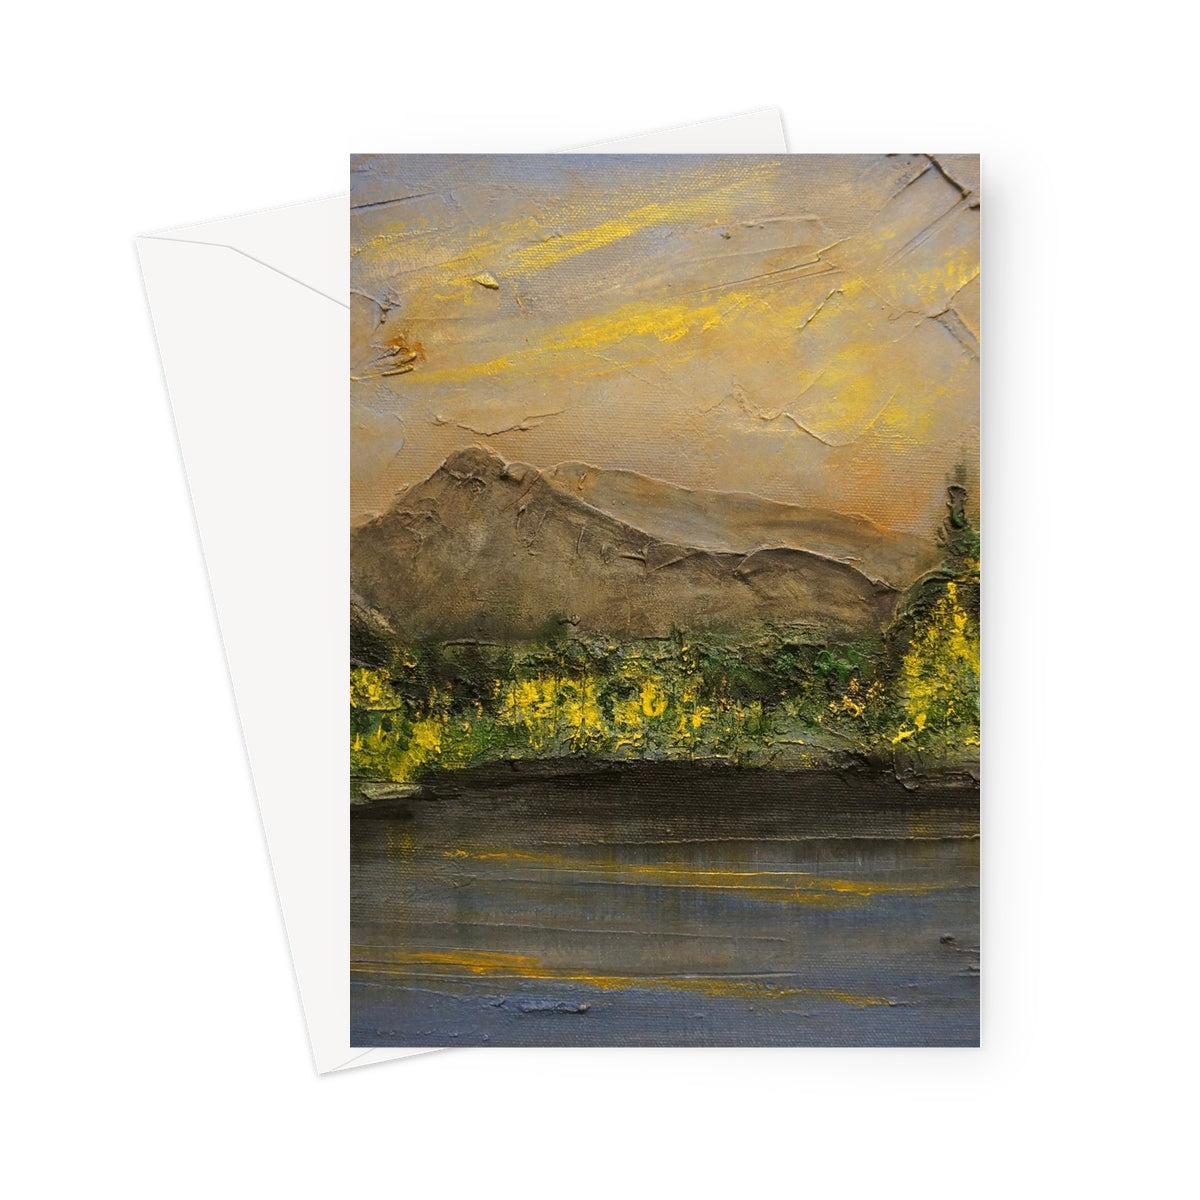 Glencoe Lochan Dusk Art Gifts Greeting Card-Greetings Cards-Scottish Lochs & Mountains Art Gallery-5"x7"-10 Cards-Paintings, Prints, Homeware, Art Gifts From Scotland By Scottish Artist Kevin Hunter